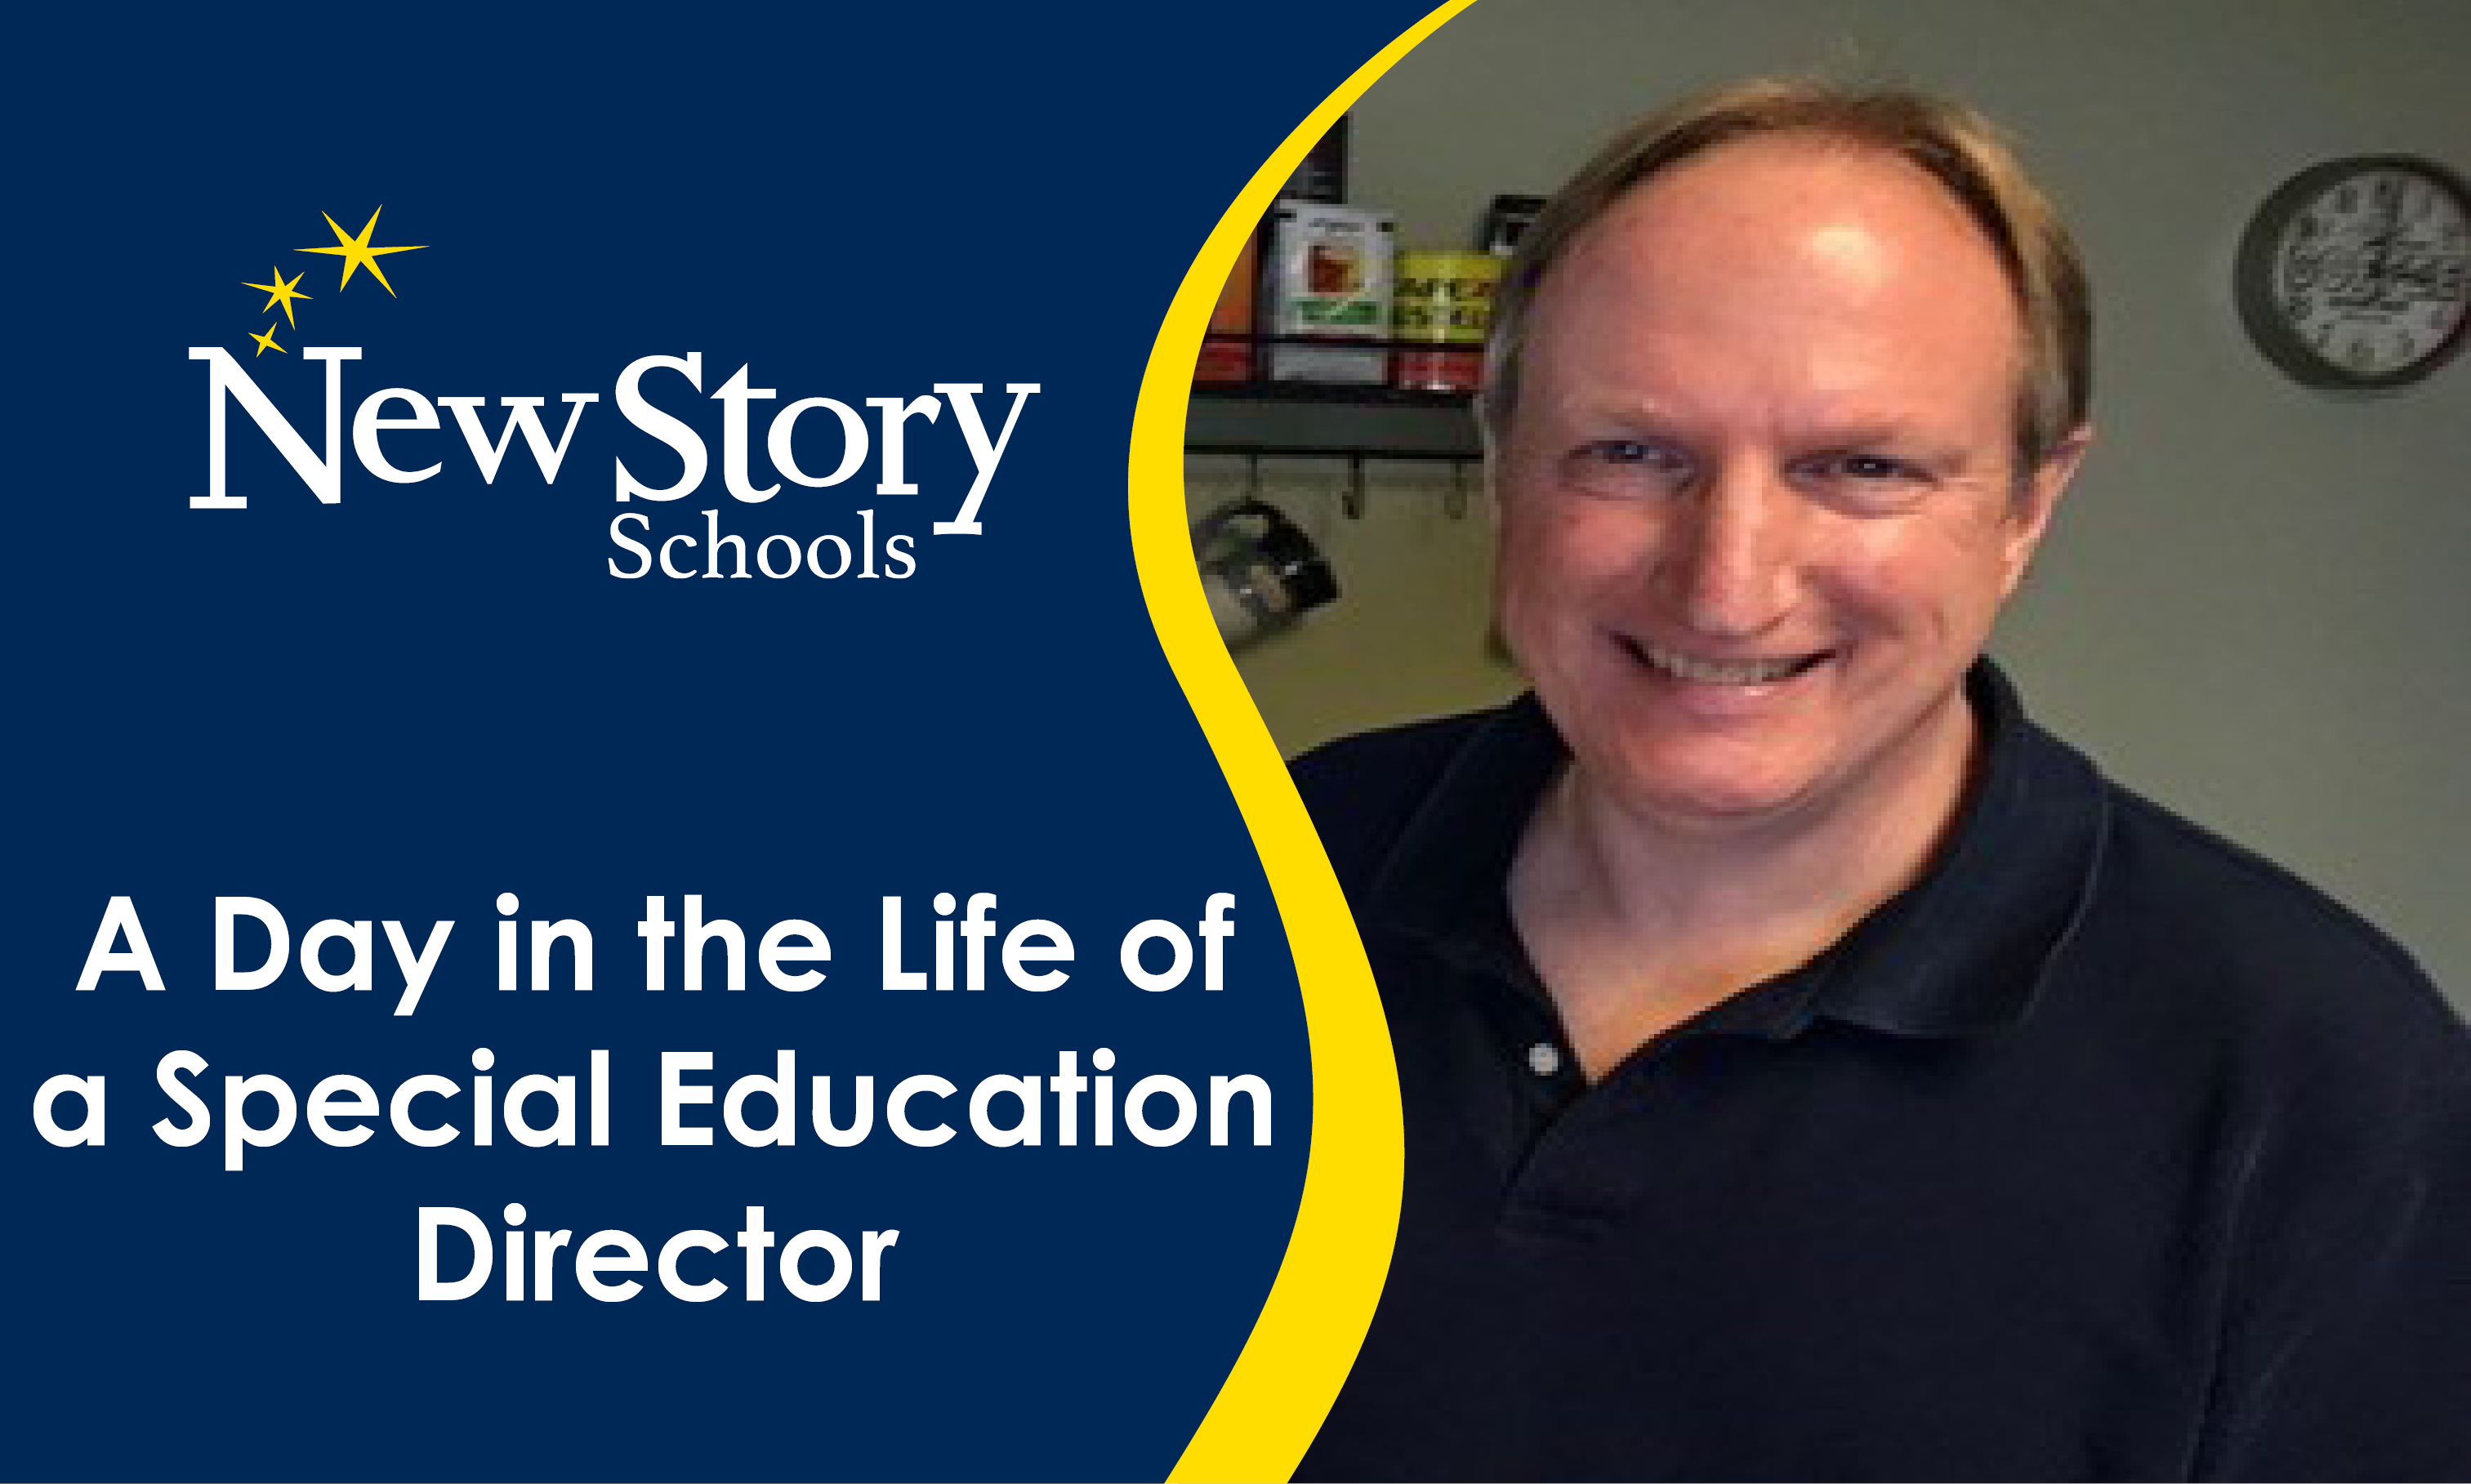 A Day in the Life of a Special Education Director